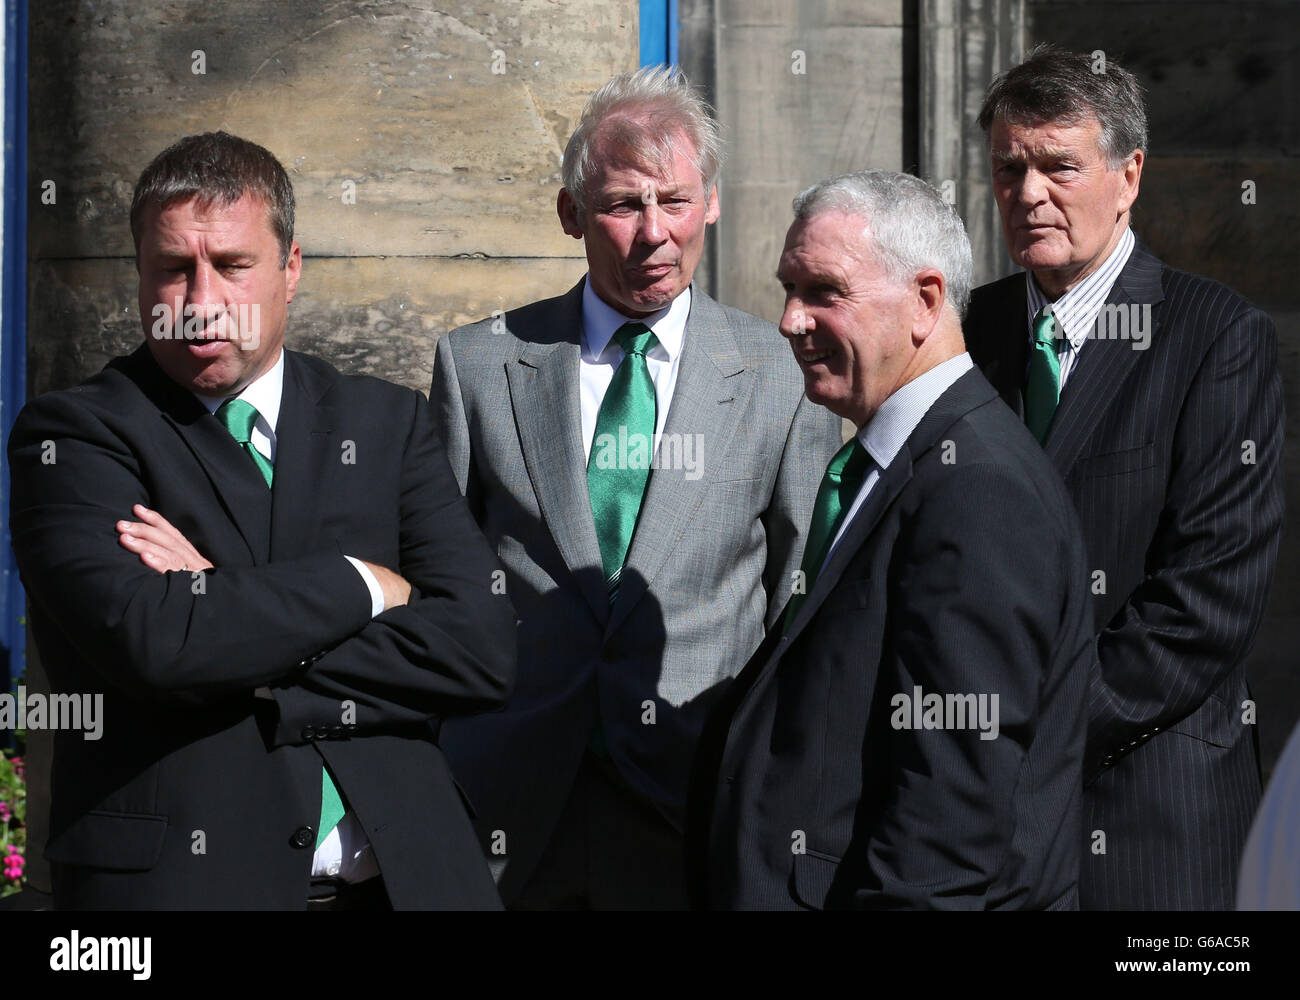 Former players (left to right) Paul Kane, Alex Cropley, Eric Stevenson and John Fraser at the funeral of former Hibernian and Scotland football player, Lawrie Reilly, at St Andrew's and St George's West Church in Edinburgh. Hundreds of fans turned out to pay their respects as the cortege passed the East Stand of Hibernian's Easter Road stadium. Stock Photo